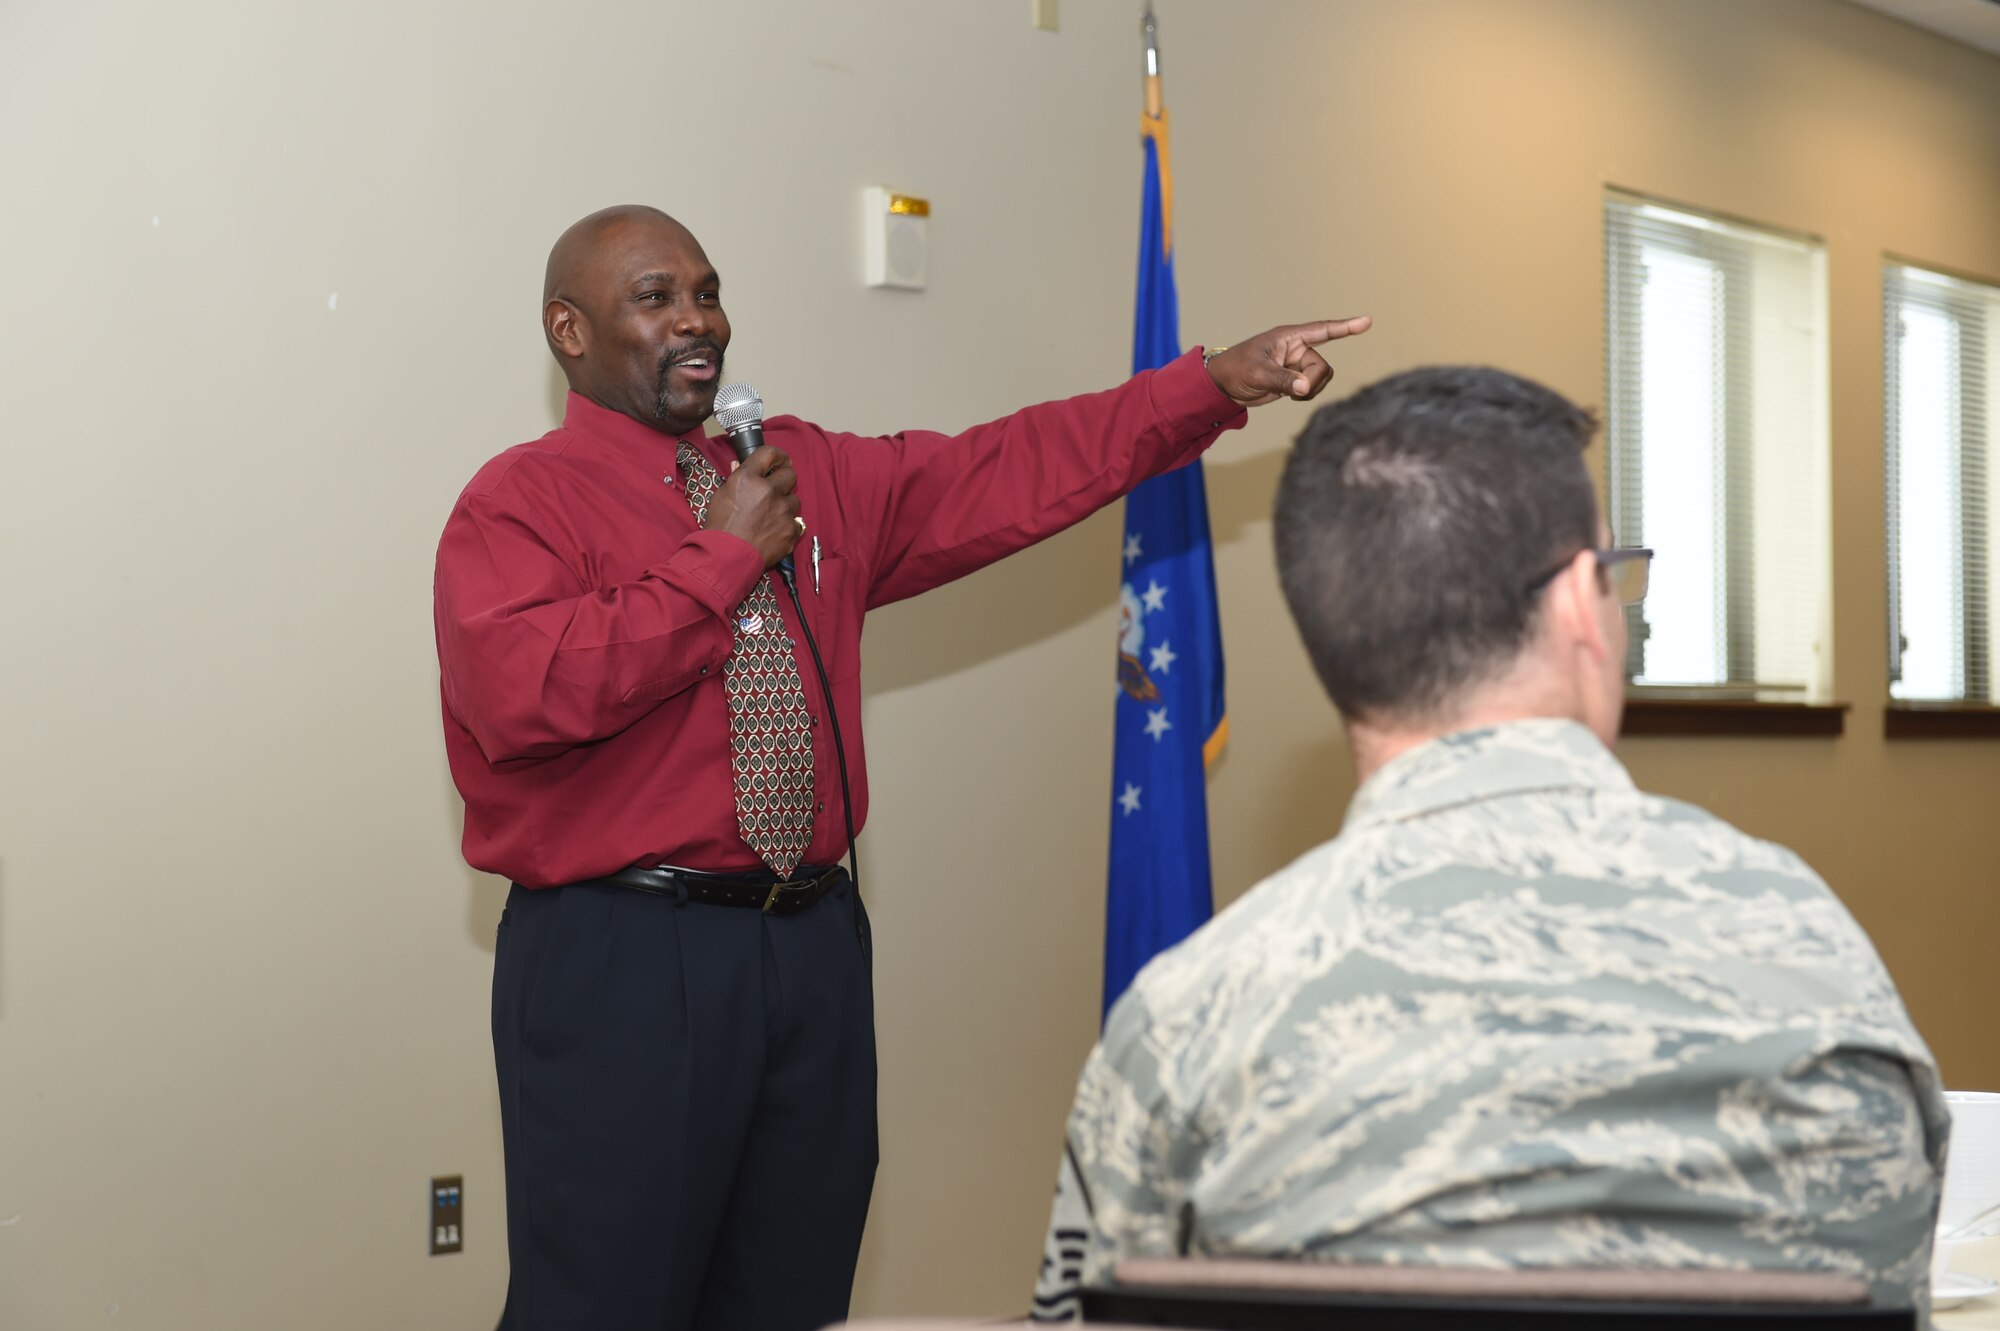 Vern L. Howard, Martin Luther King Jr. Colorado Holiday Commission chairman, speaks to Team Buckley members during a Black History Month presentation Feb. 26, 2015 at the chapel on Buckley Air Force Base, Colo. Howard spoke on the contributions African-Americans have made in American history while attendees sampled cultural dishes. (U.S. Air Force photo by Airman 1st Class Samantha Saulsbury/Released)